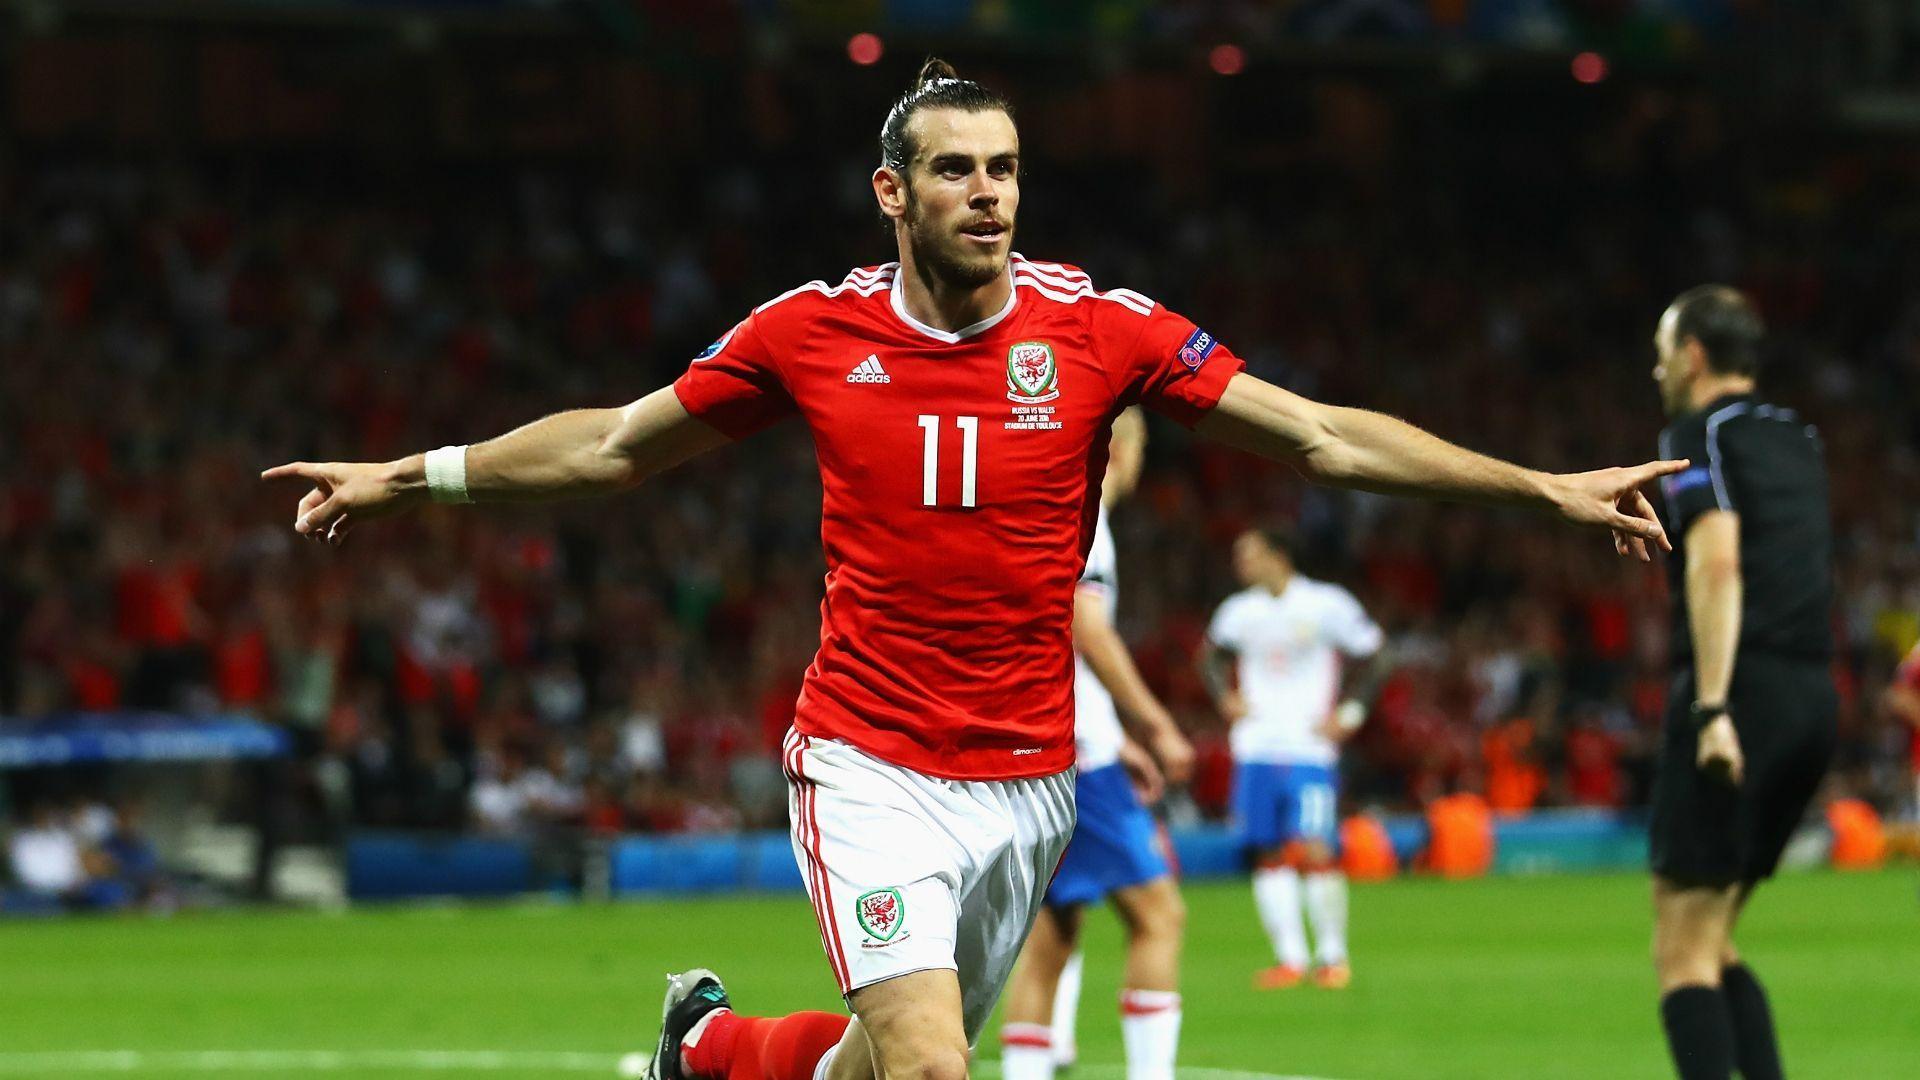 Bale d&;Or! Wales wonder can rival Ronaldo as Madrid&;s main Golden